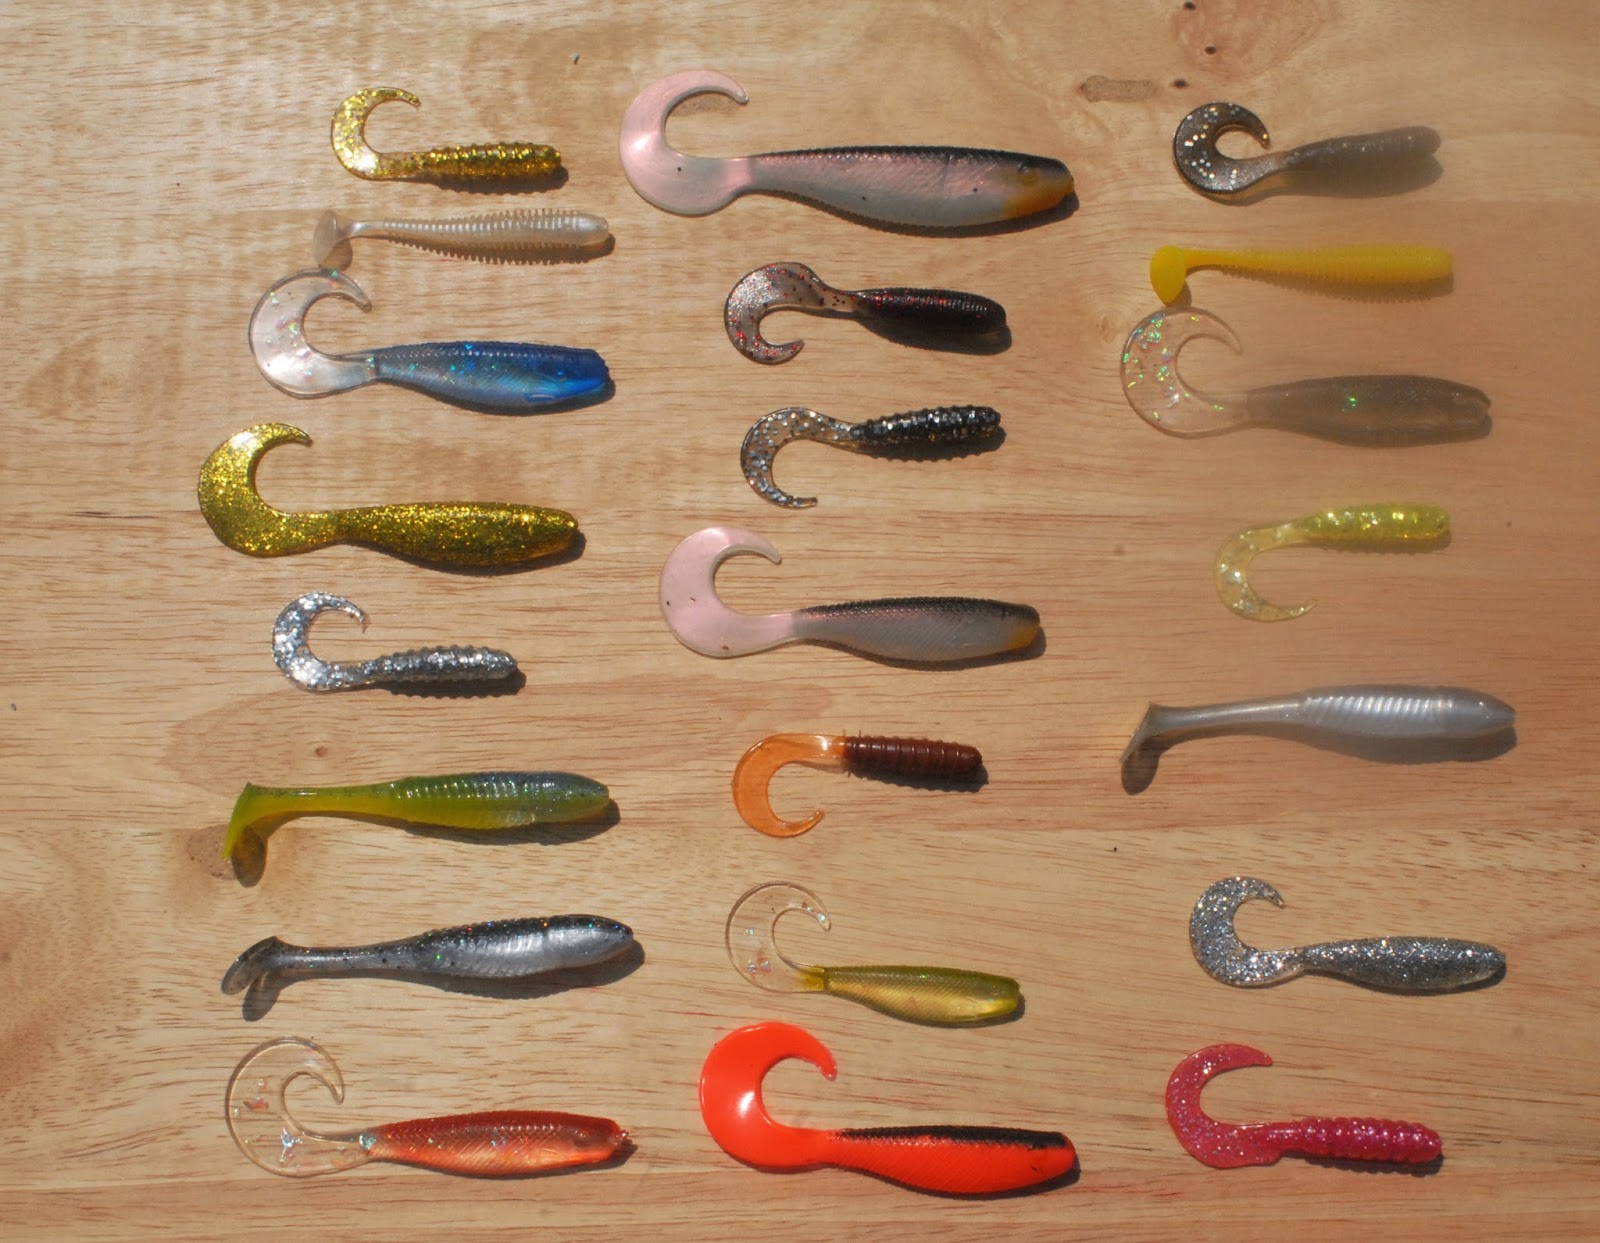 Steven outside: Here's the Vic Coomer Lures I have in my collection and my  philosophy on lure selection.